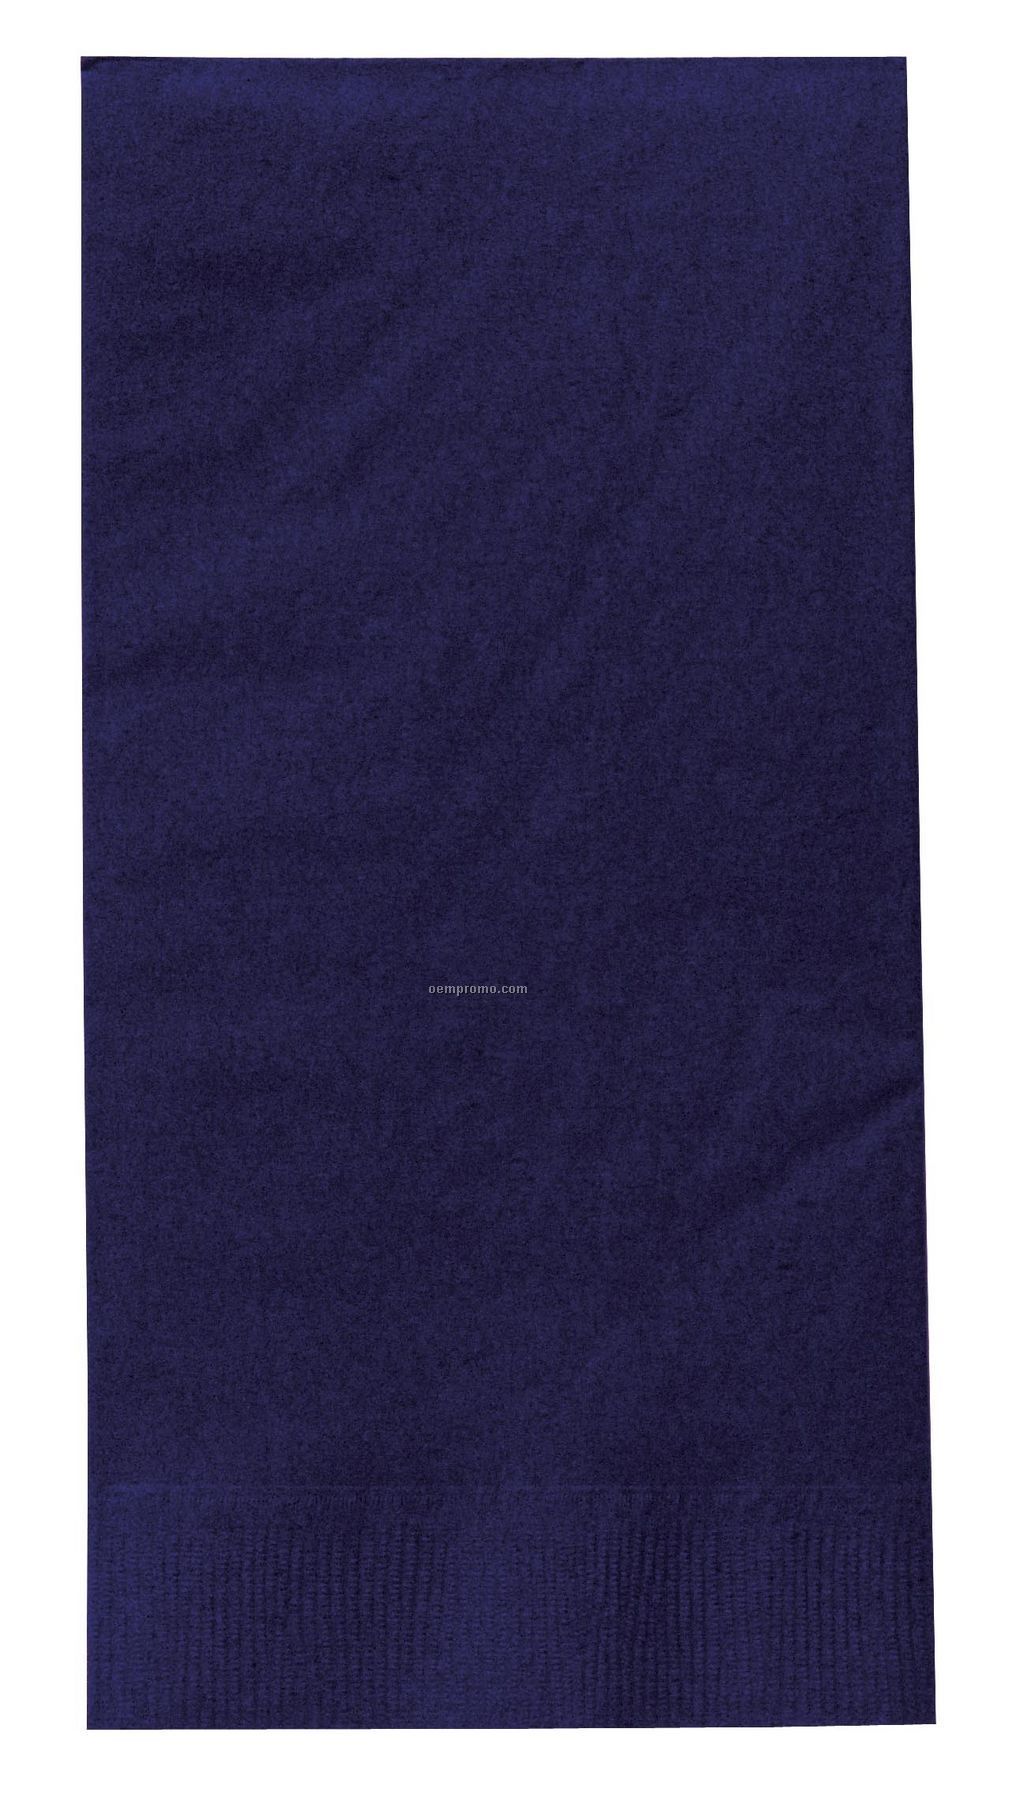 Colorware Navy Blue Dinner Napkins With 1/8 Fold